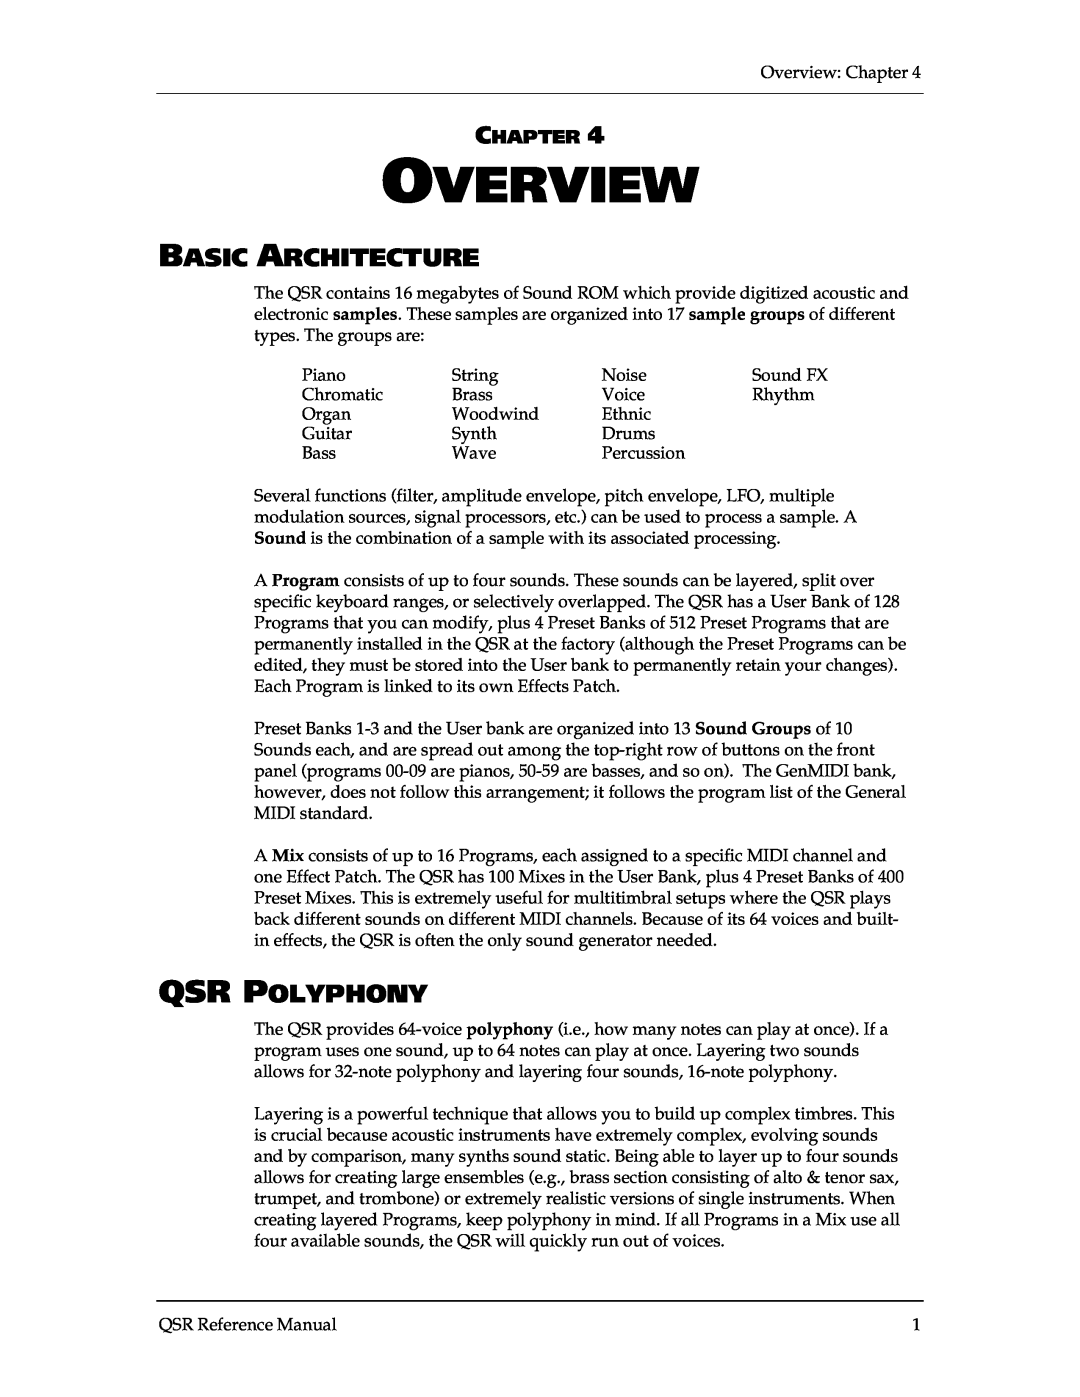 Alesis QSR 64 manual Overview, Basic Architecture, Qsr Polyphony, Chapter 